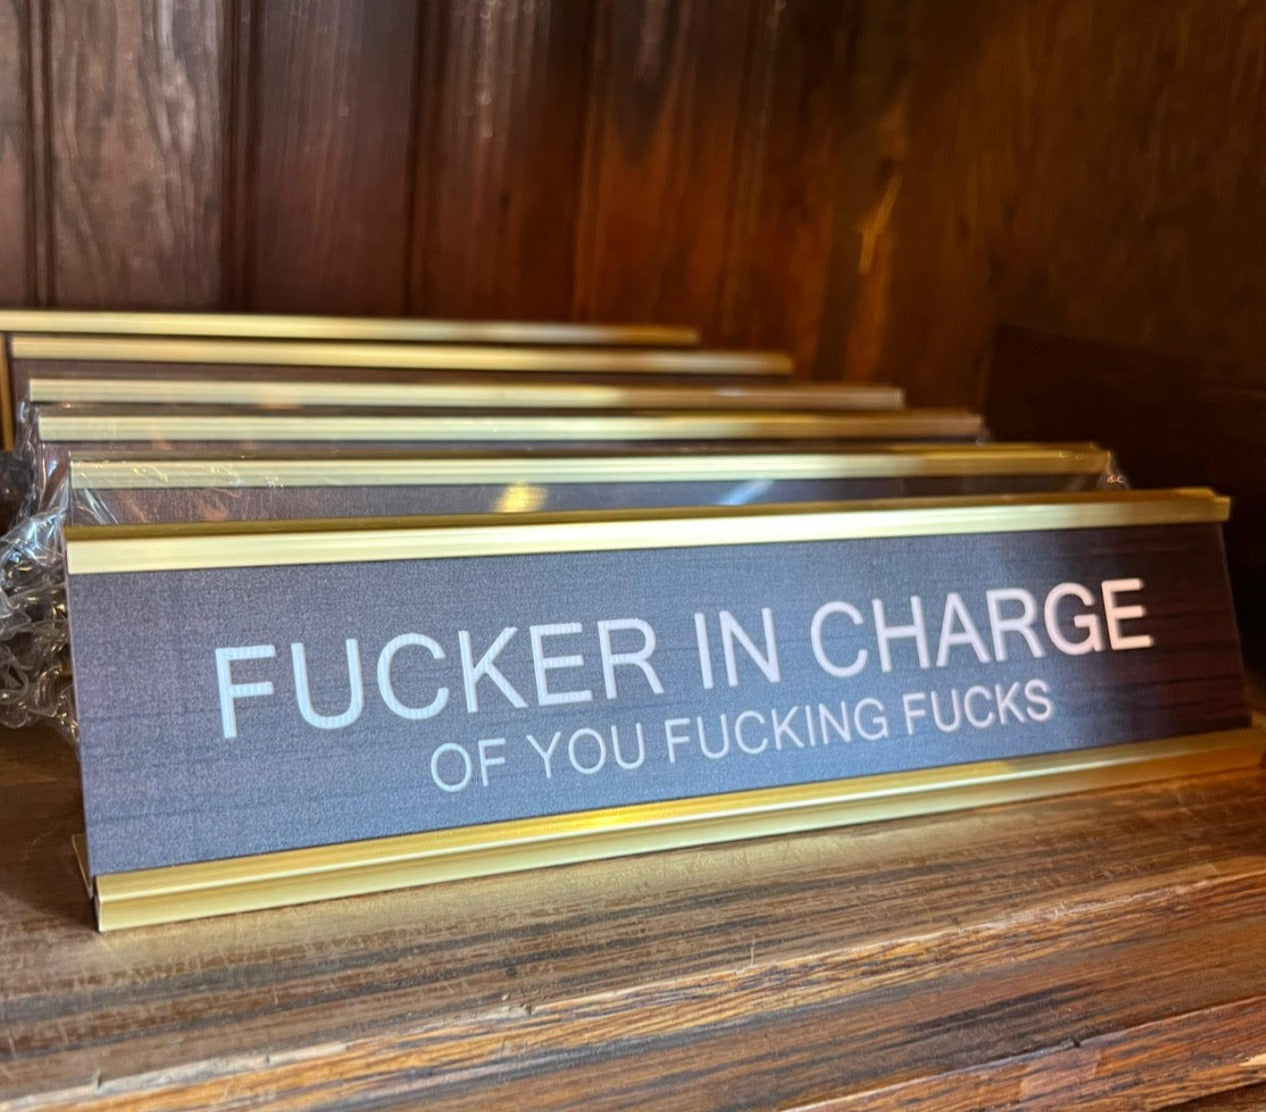 Fucker In Charge of You Fucking Fucks - Funny Desk Name Plate